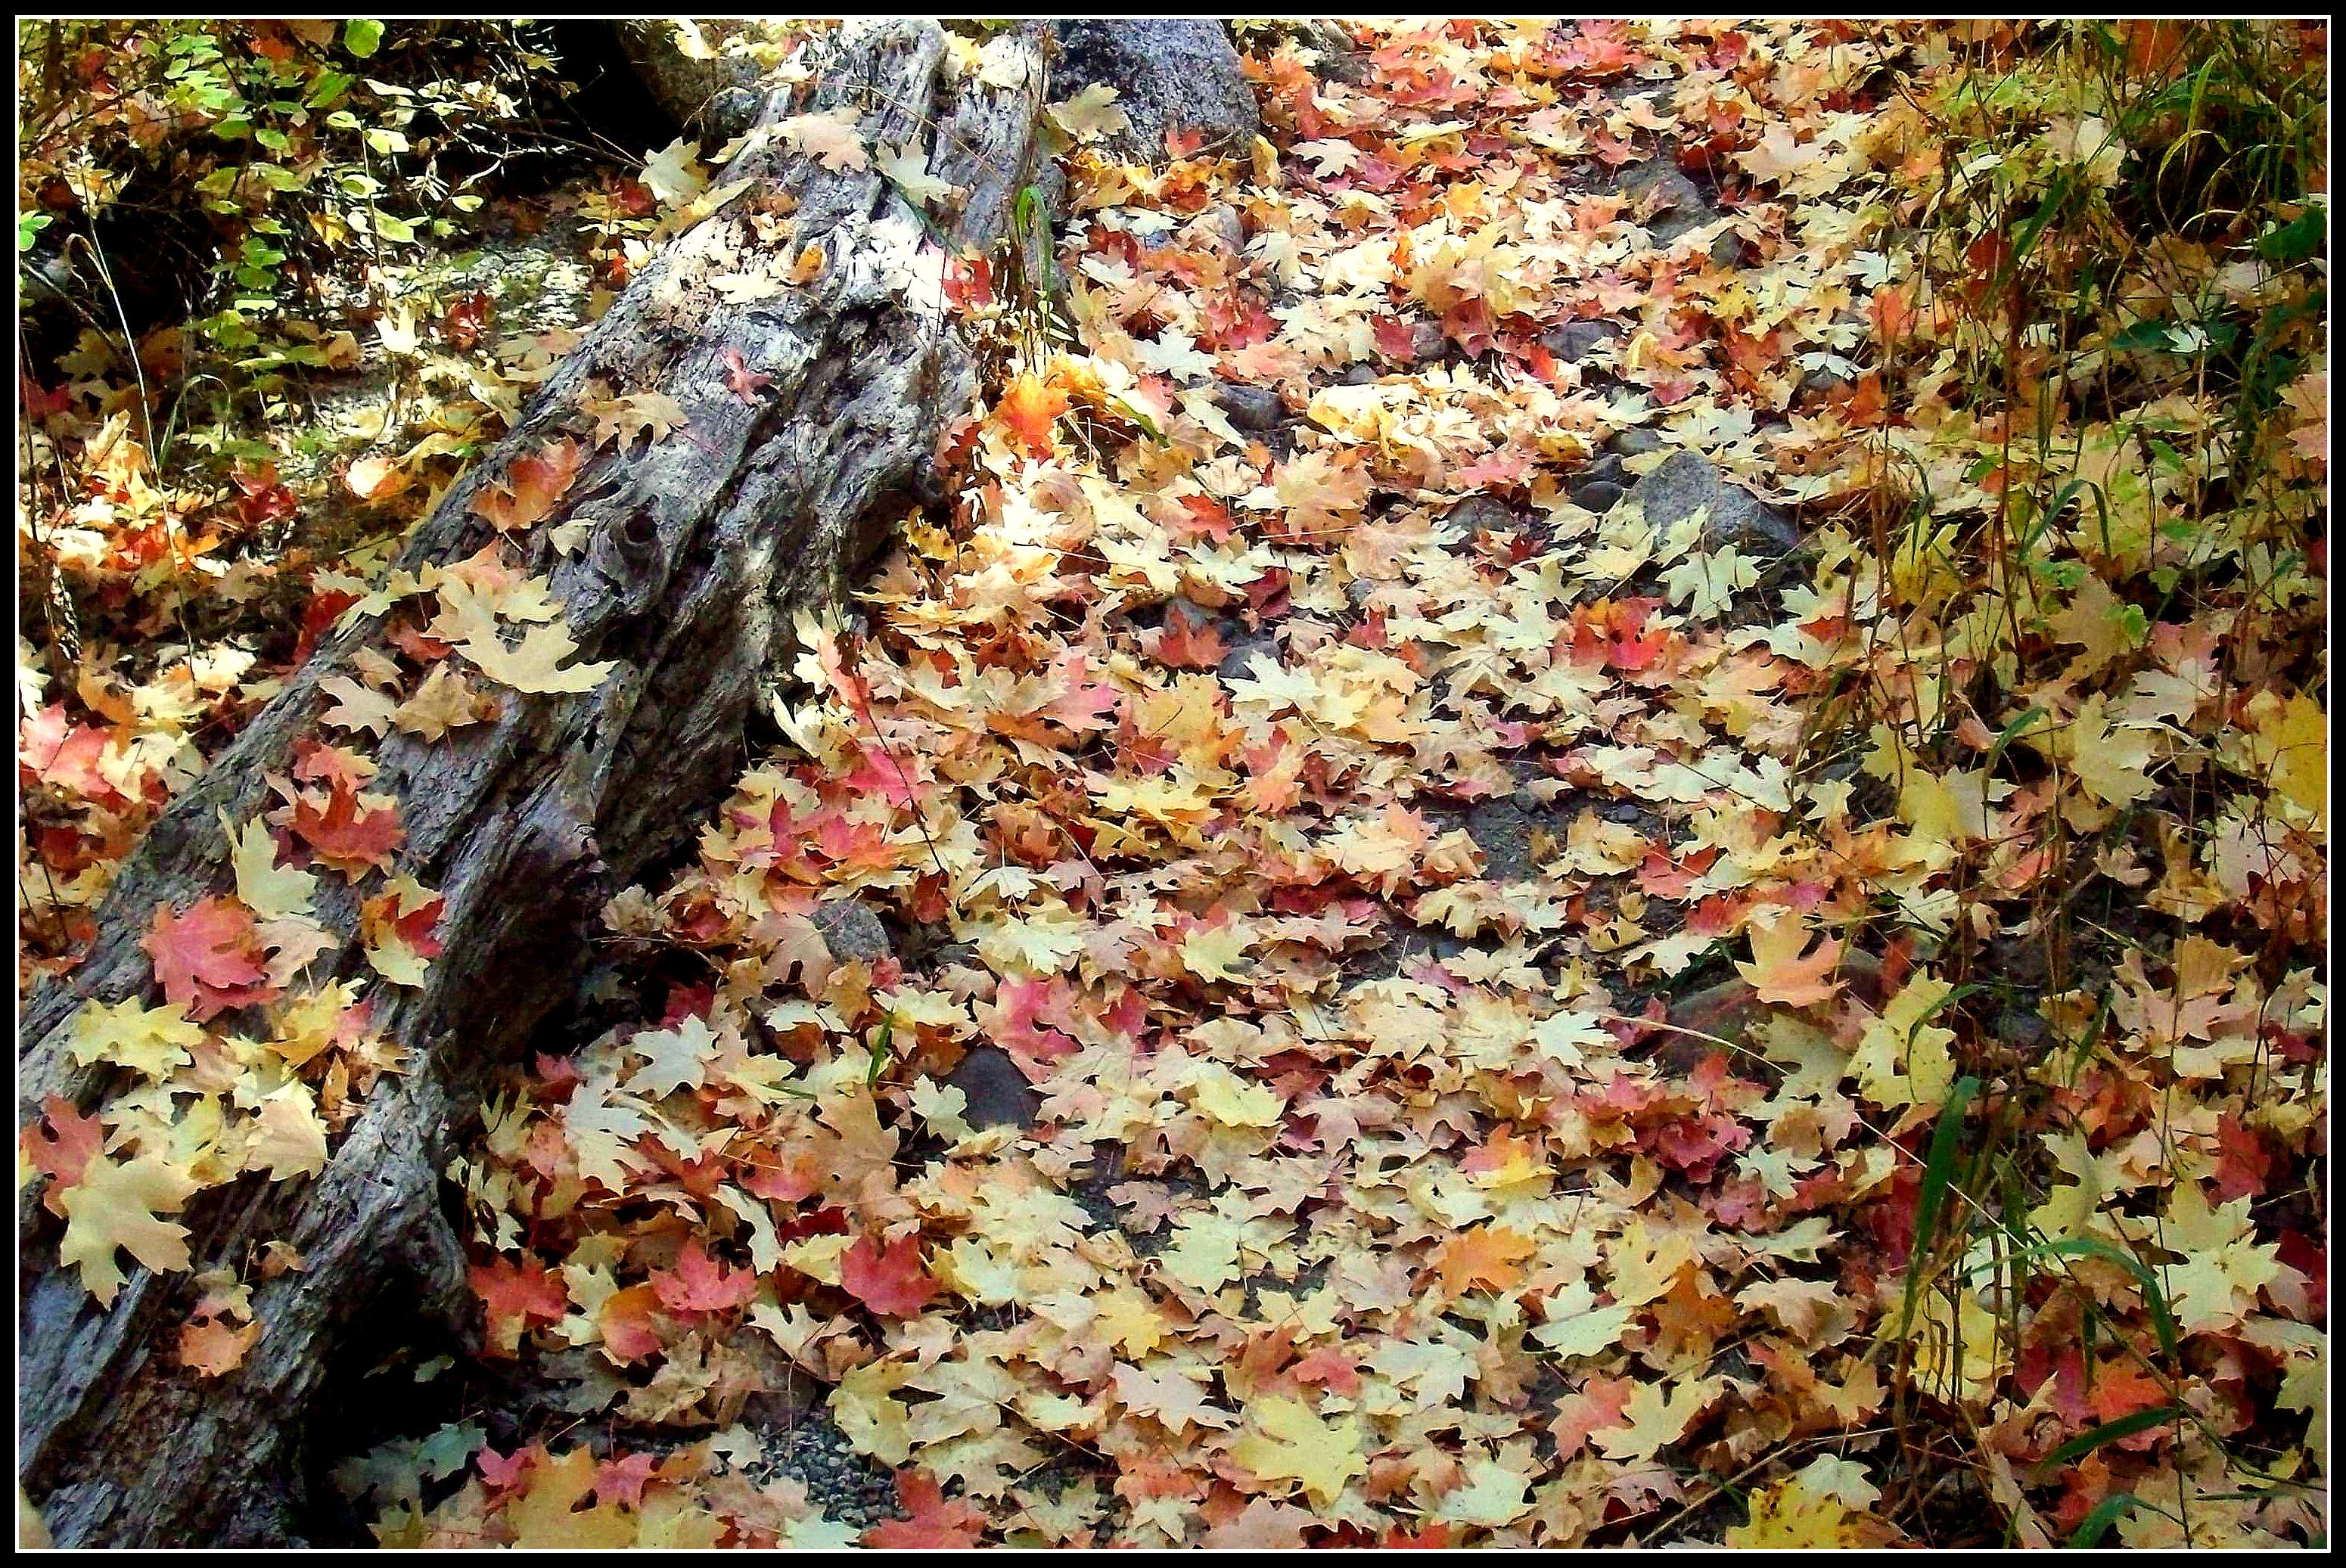 leaf-litter on trail | Scott's Place...Images and Words